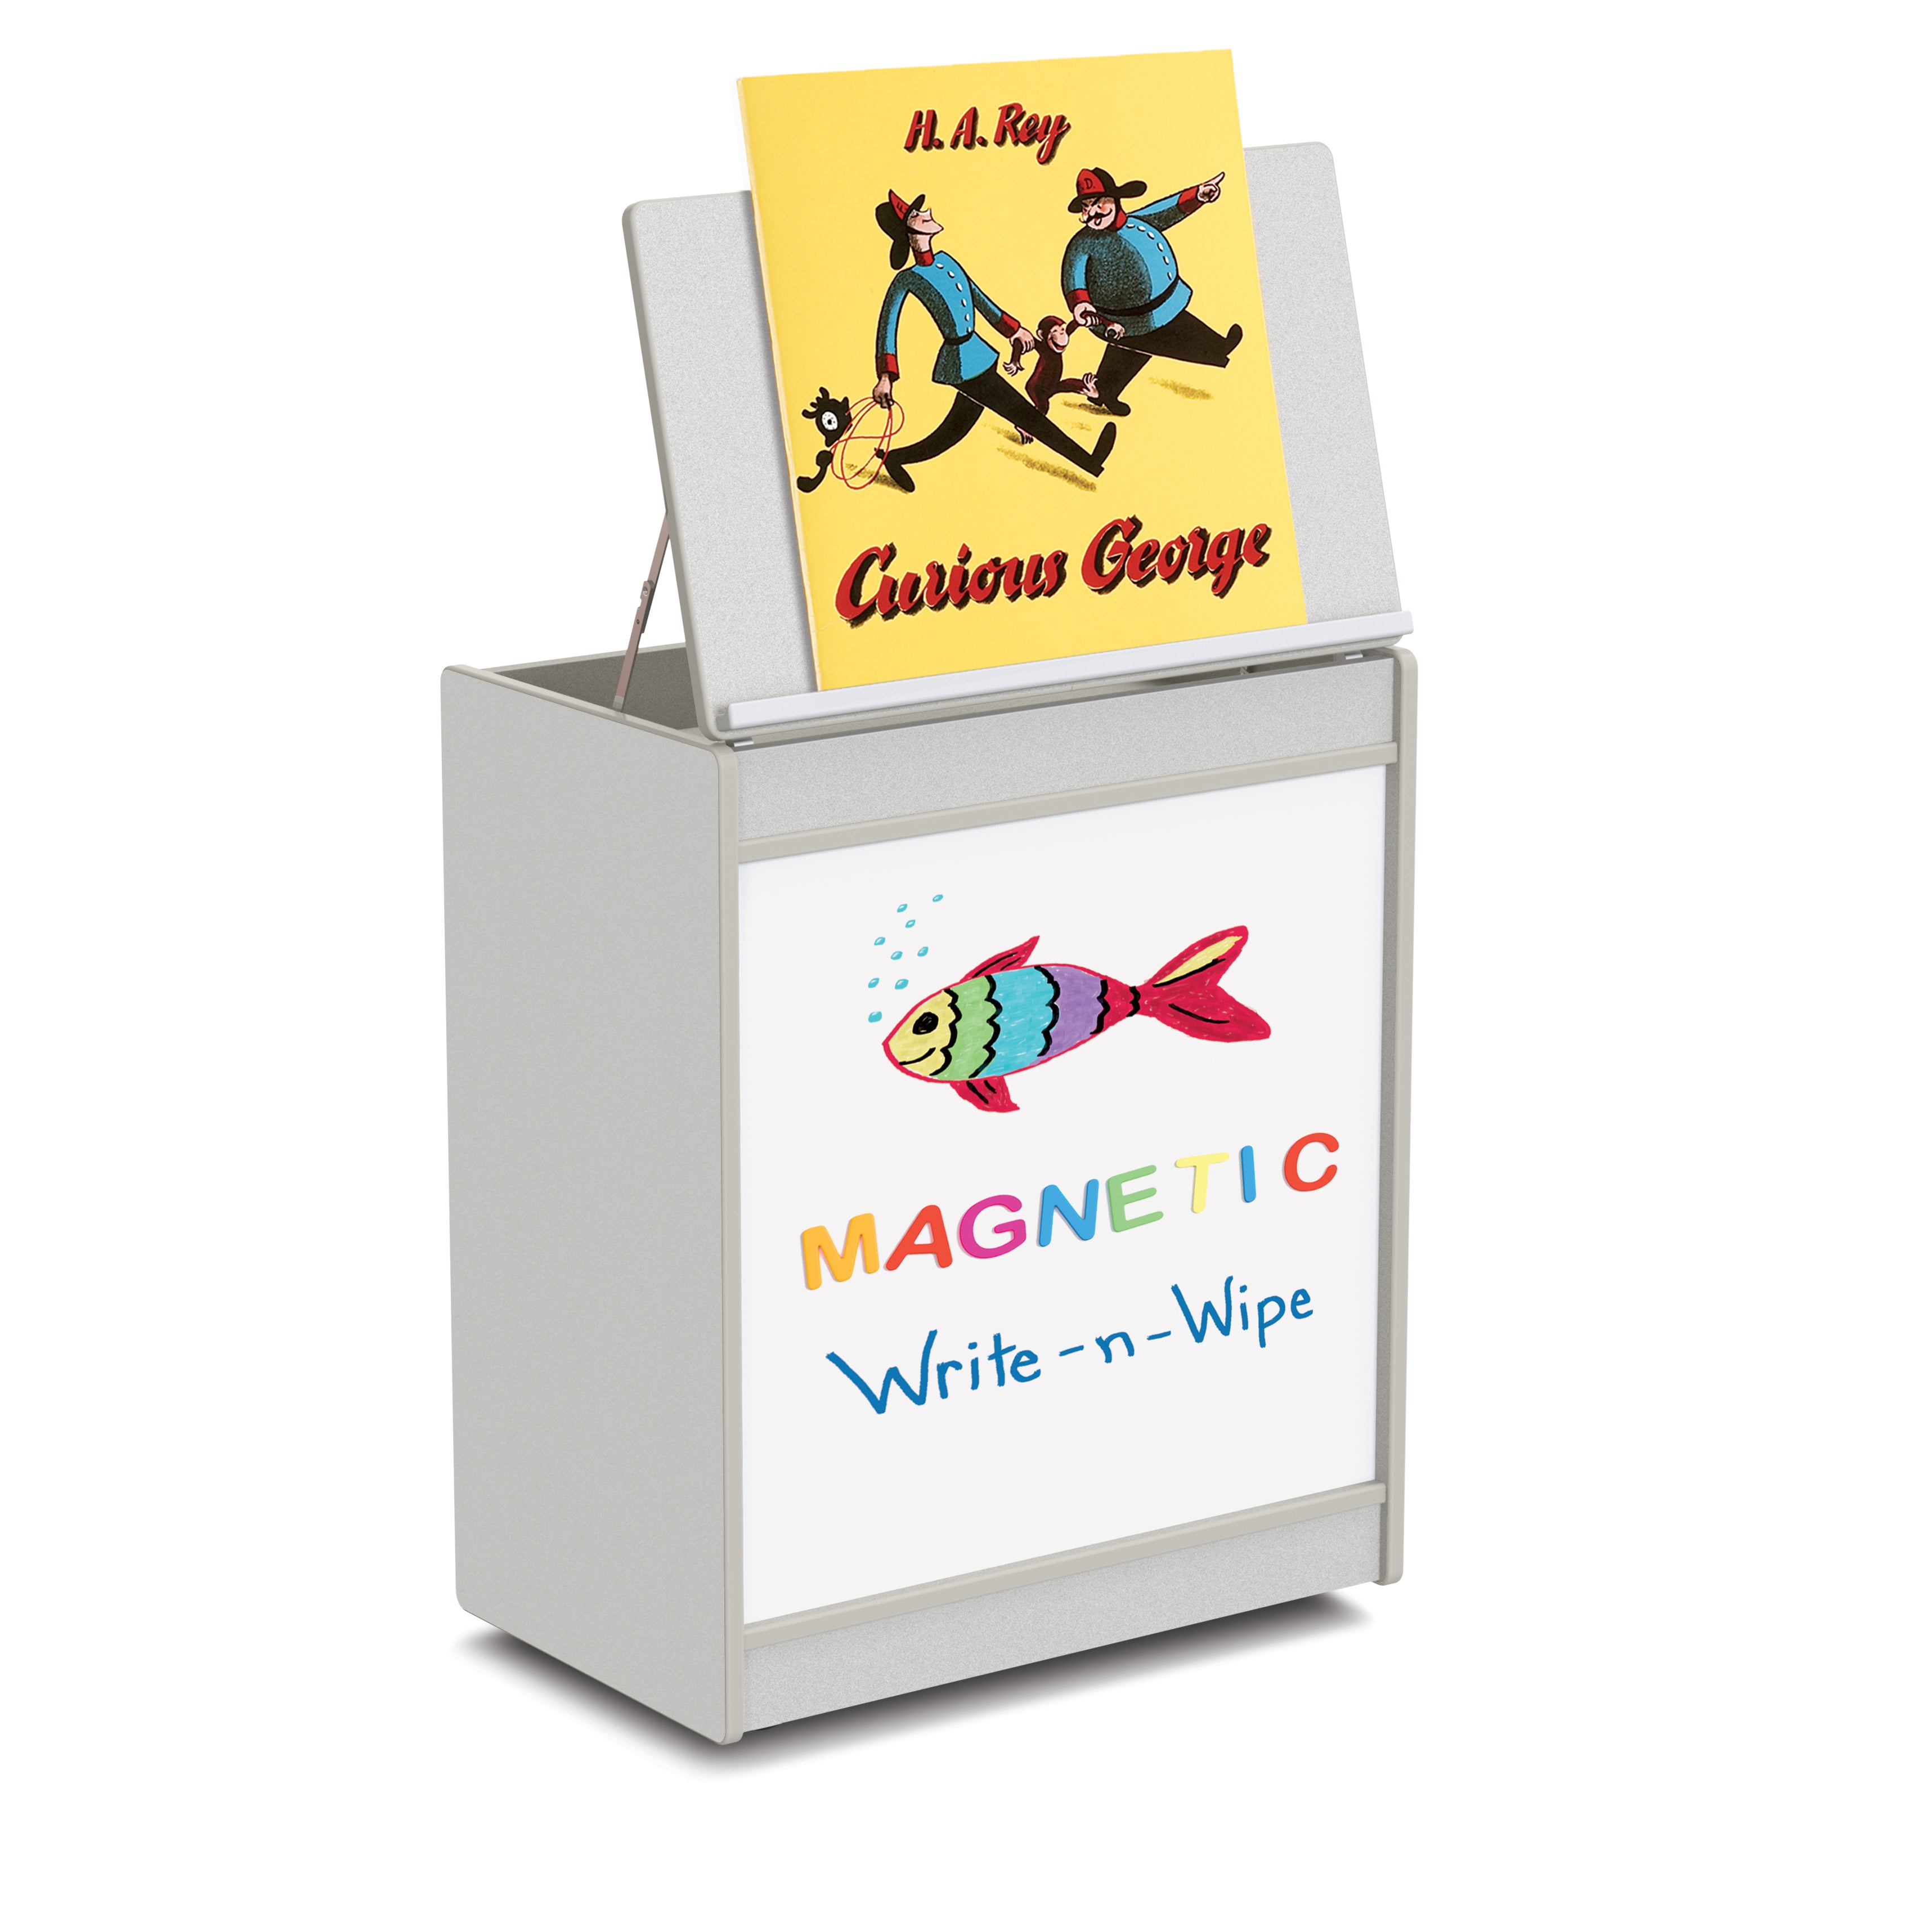 0543JCMG000, Rainbow Accents Big Book Easel - Magnetic Write-n-Wipe  - Gray